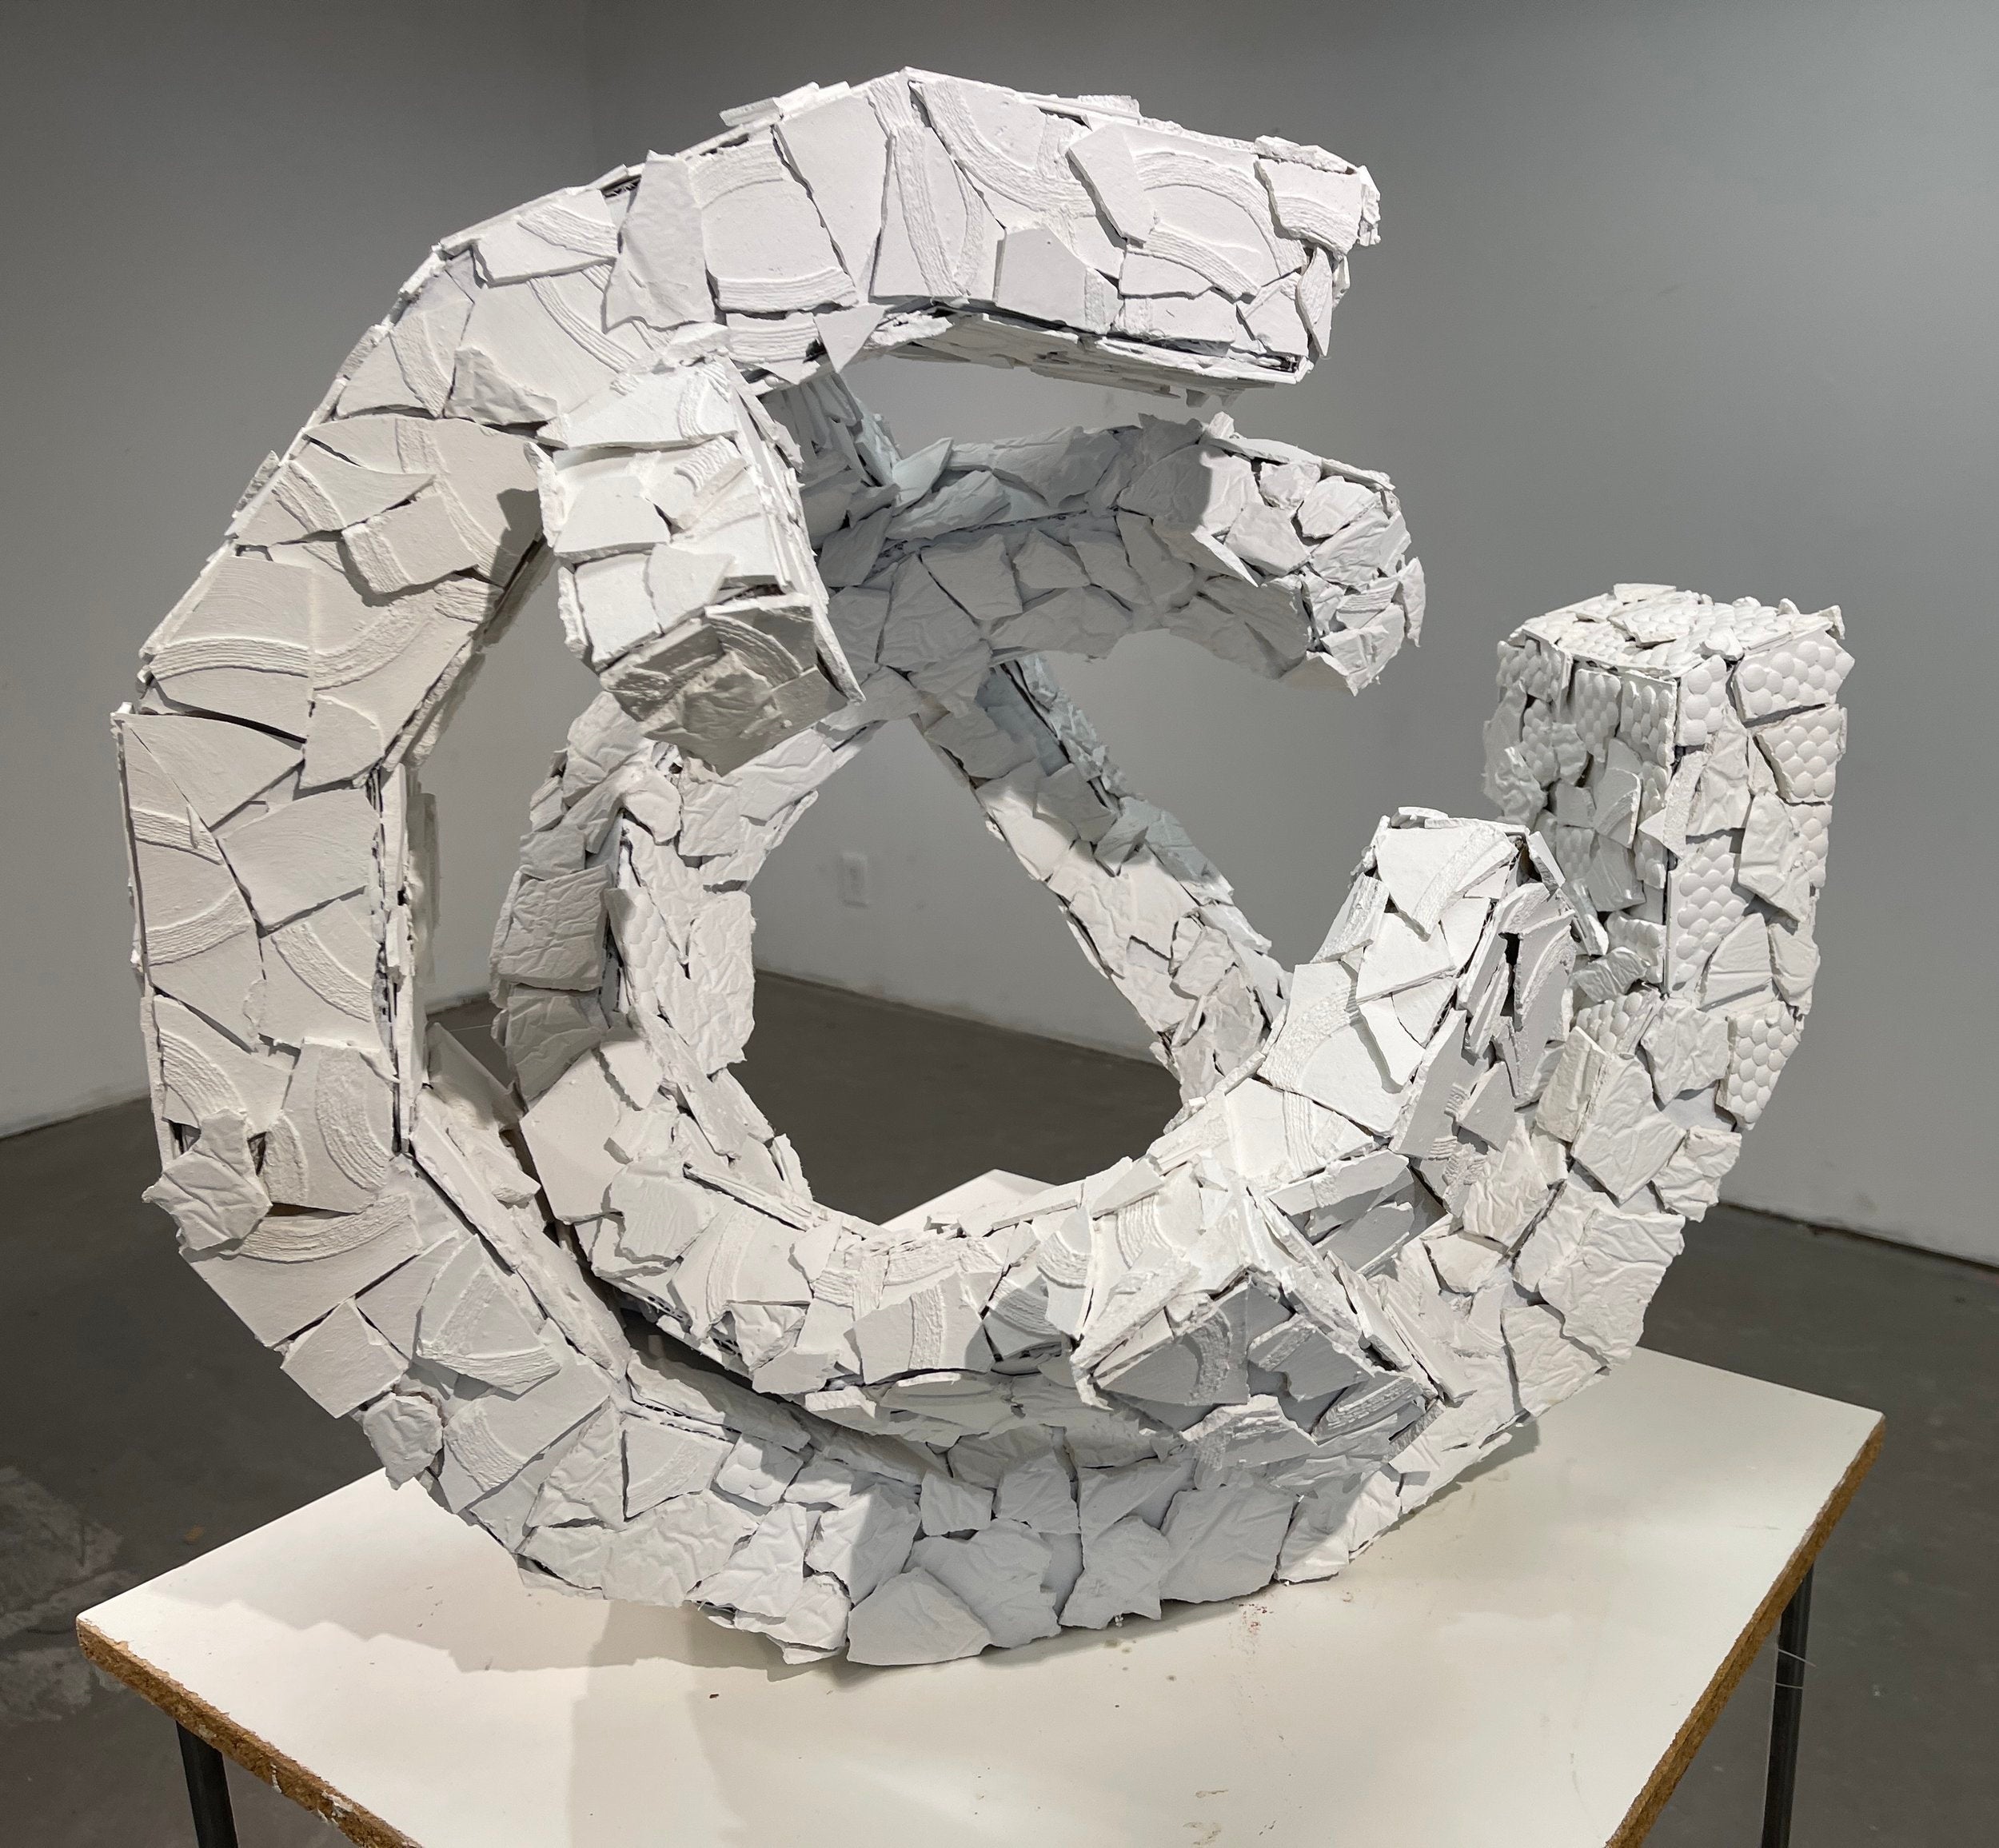 White plaster and cardboard sculpture viewed from the front.